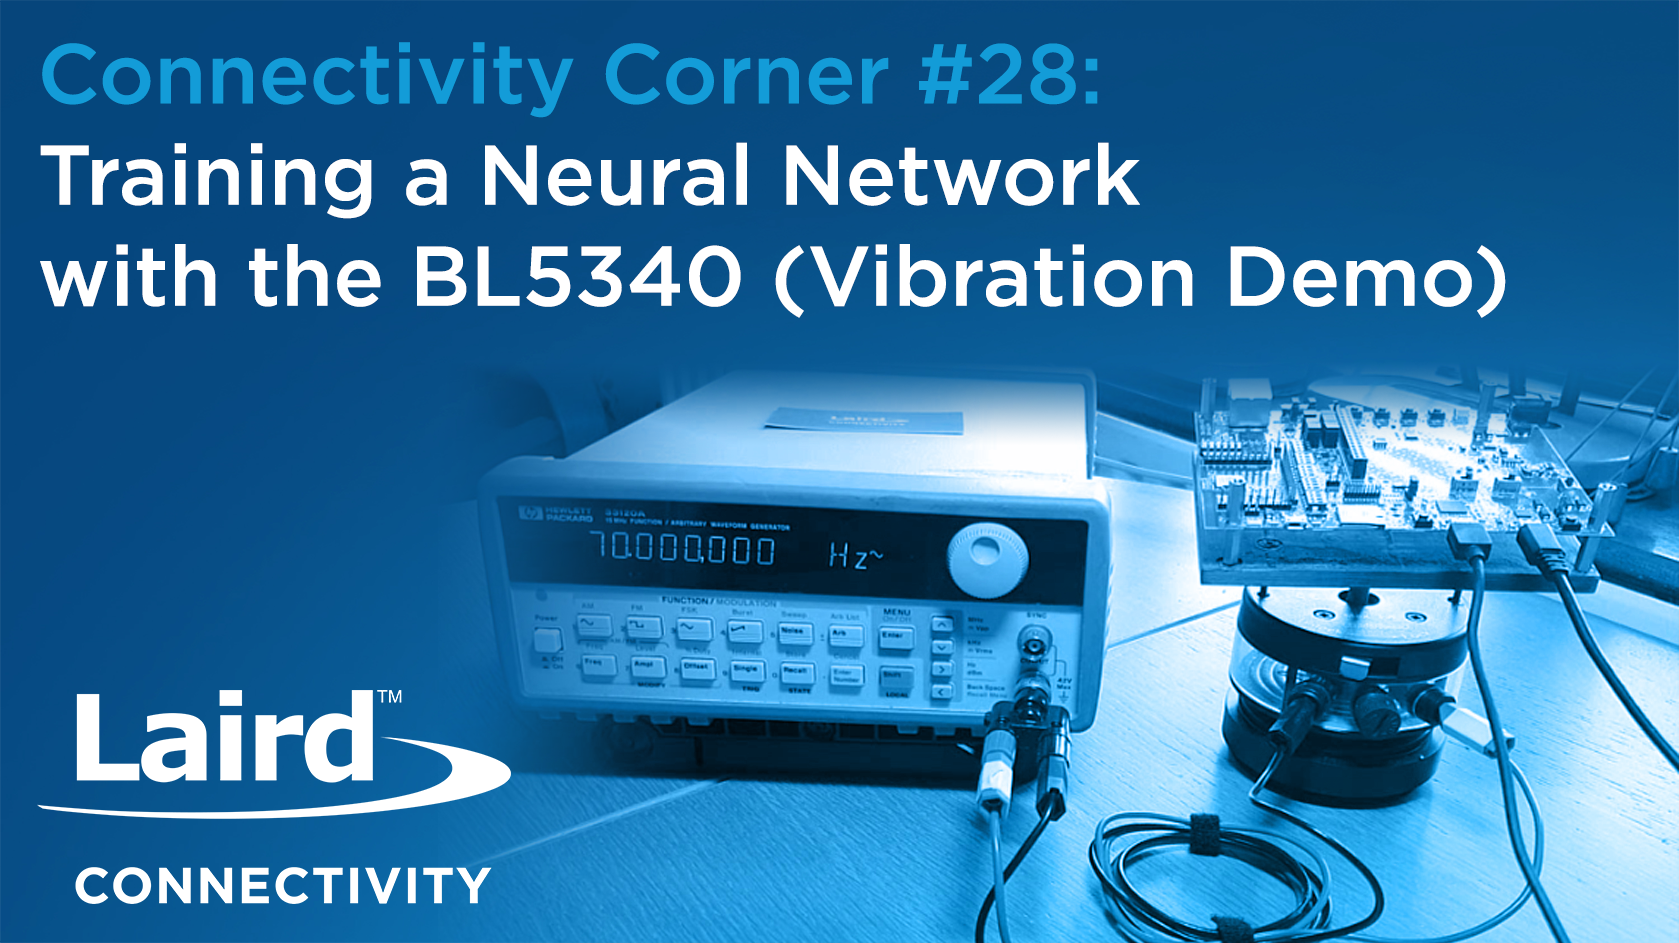 Episode 28: Training a Neural Network with the BL5340 (Vibration Demo)